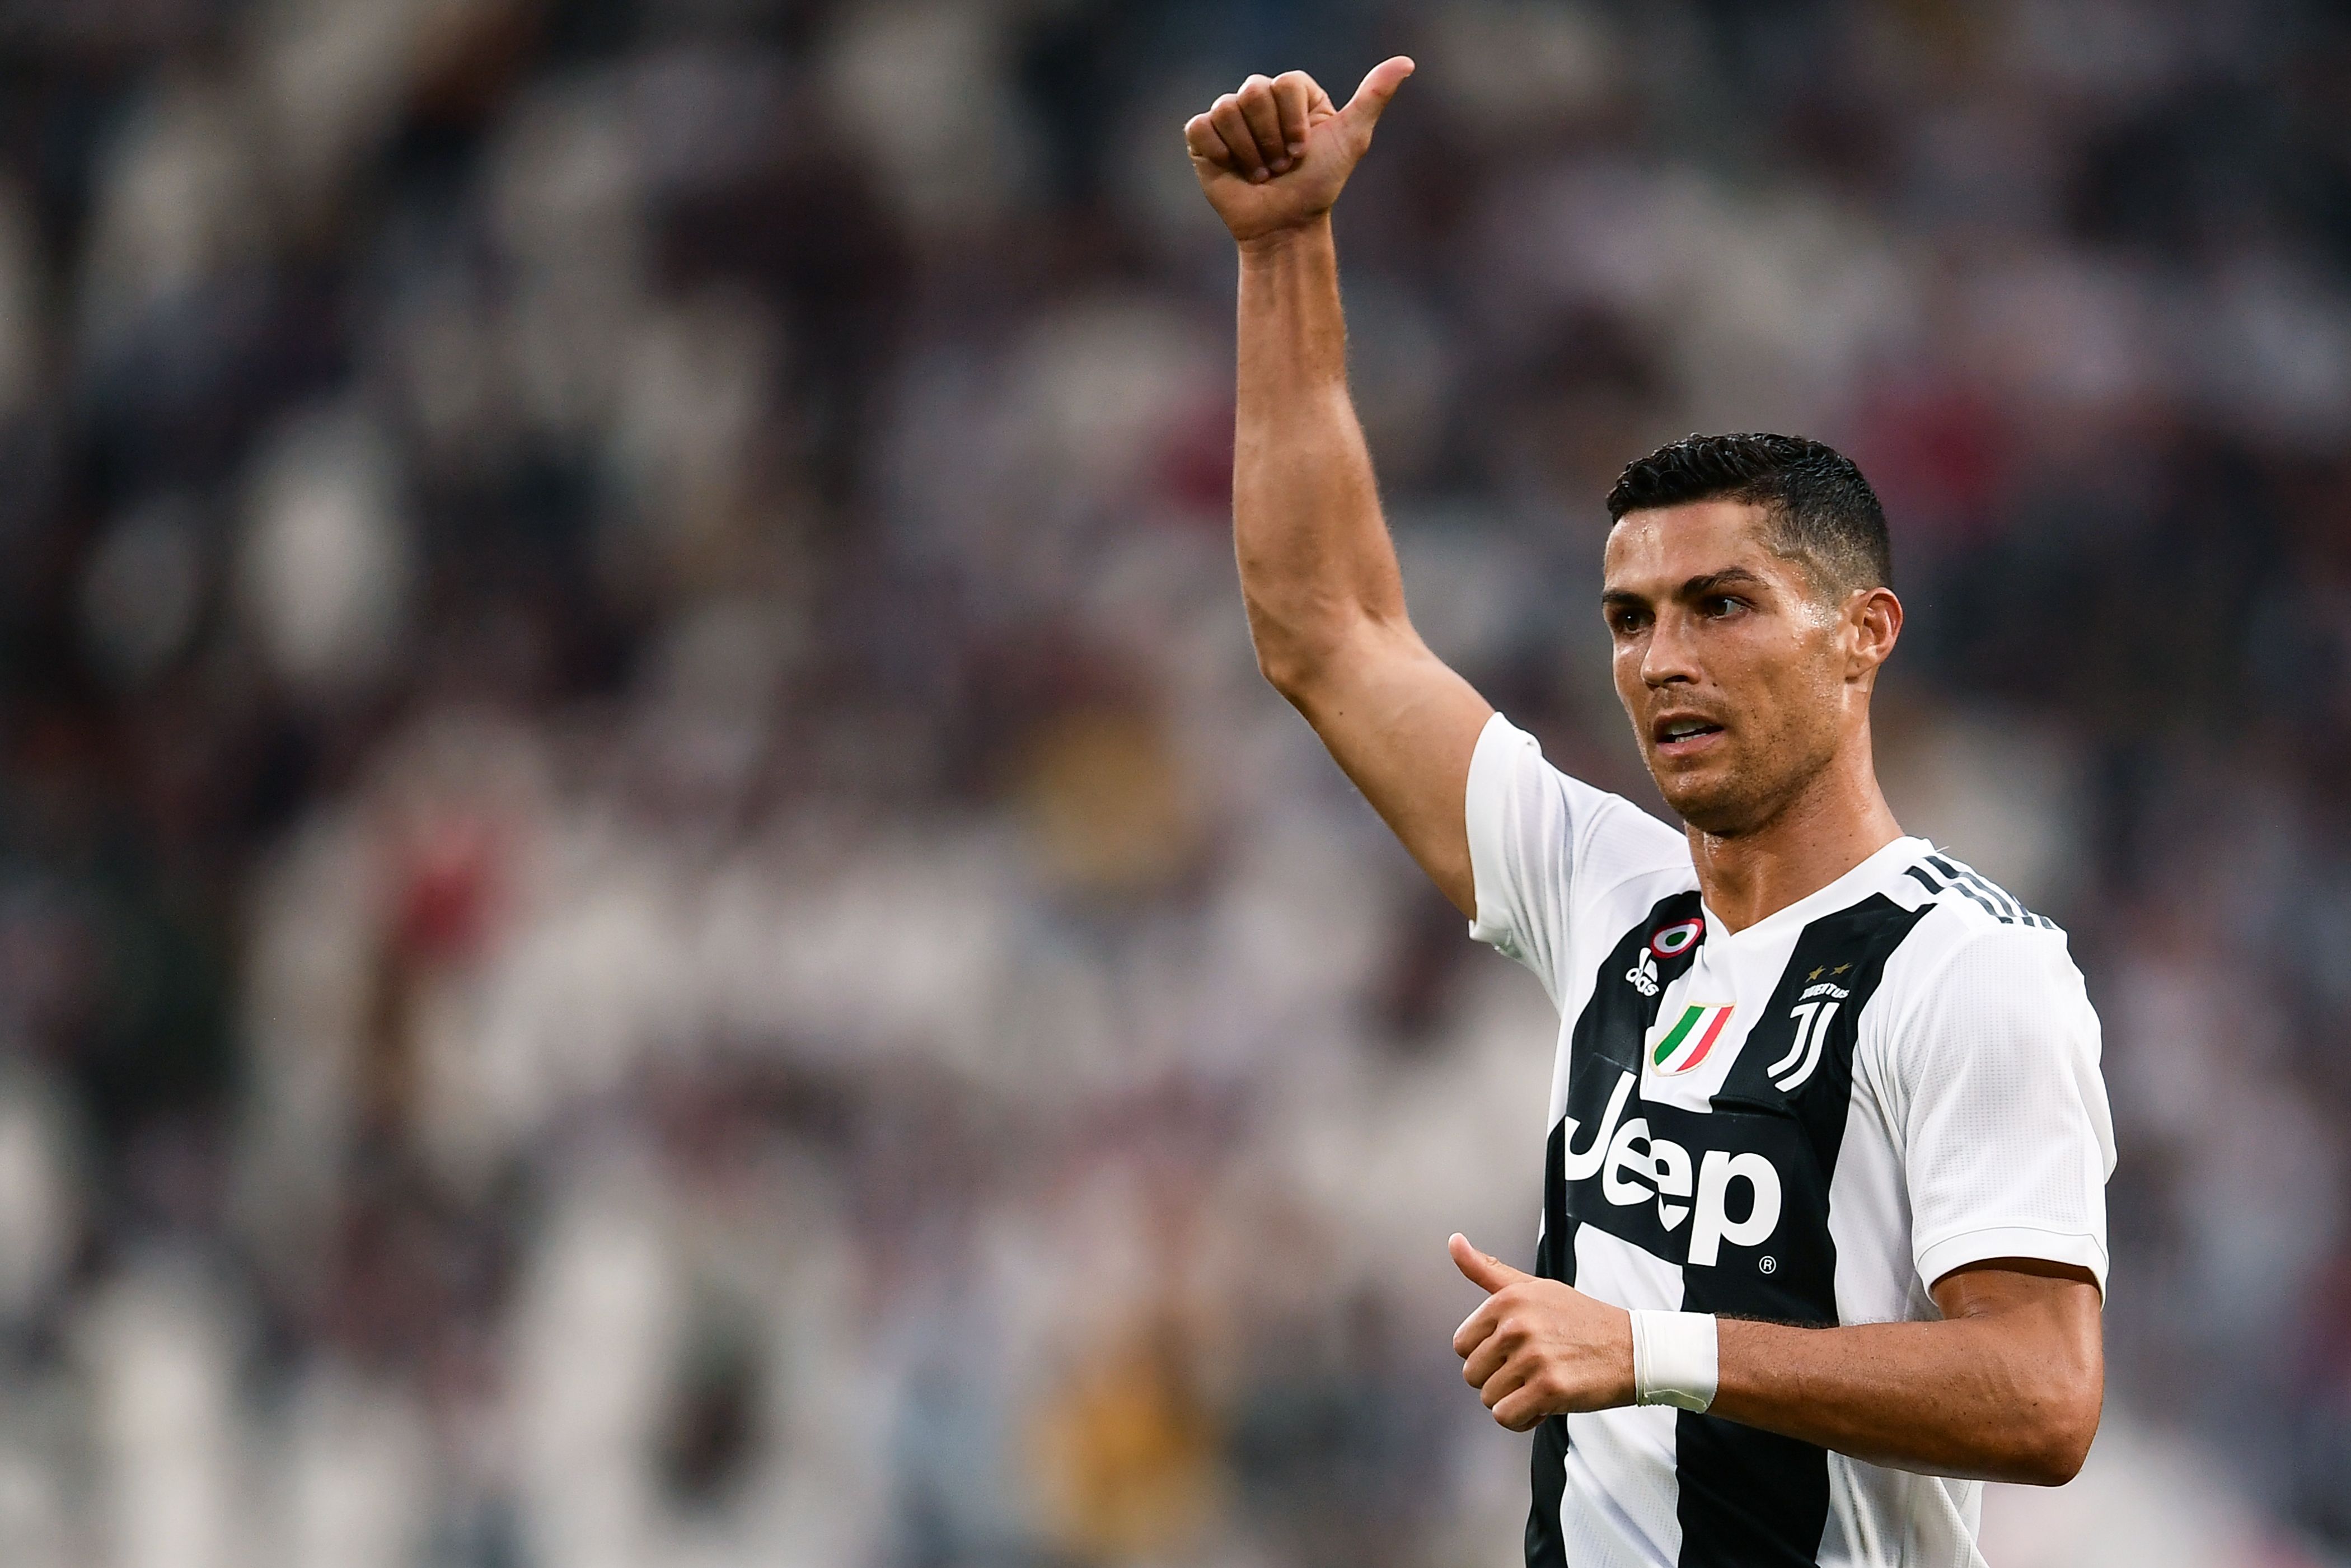 Juventus' Portuguese forward Cristiano Ronaldo gestures during the Italian Serie A football match Juventus vs Lazio on August 25, 2018 at the Allianz Stadium in Turin. (Photo by MARCO BERTORELLO / AFP)        (Photo credit should read MARCO BERTORELLO/AFP/Getty Images)